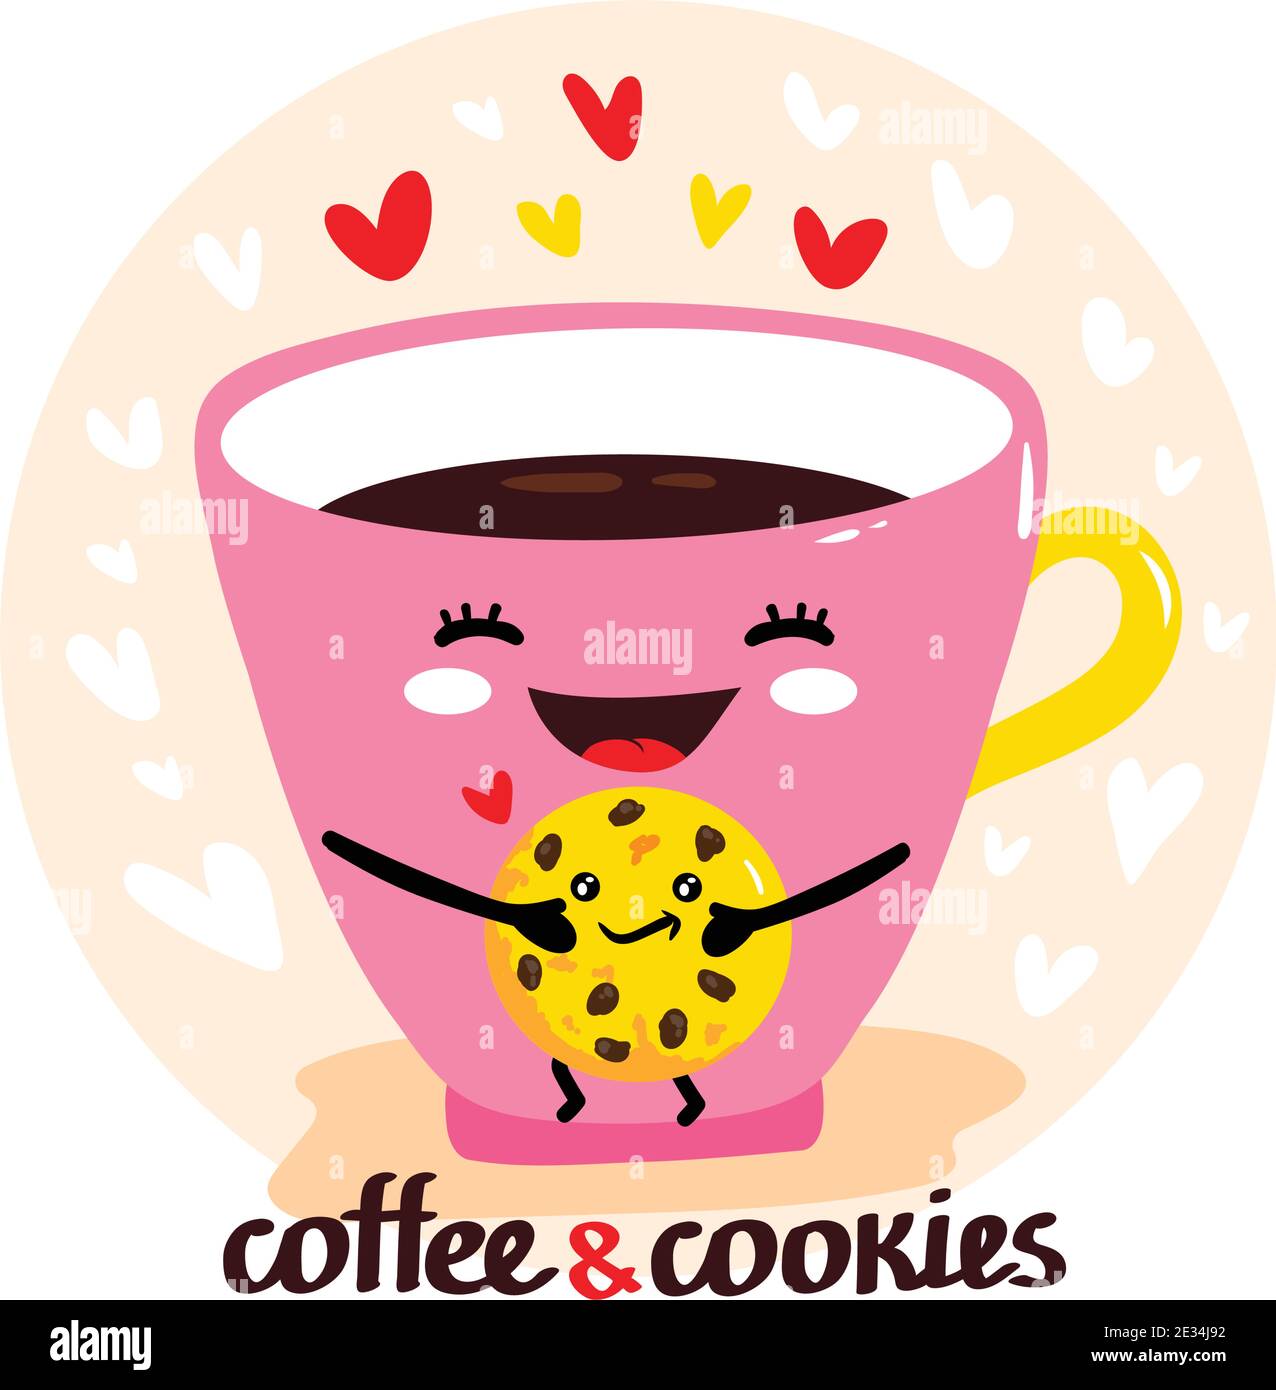 https://c8.alamy.com/comp/2E34J92/cute-vector-illustration-of-cup-of-coffee-holds-cookies-happy-kawaii-character-with-smiling-face-hearts-and-text-coffee-time-card-poster-print-2E34J92.jpg